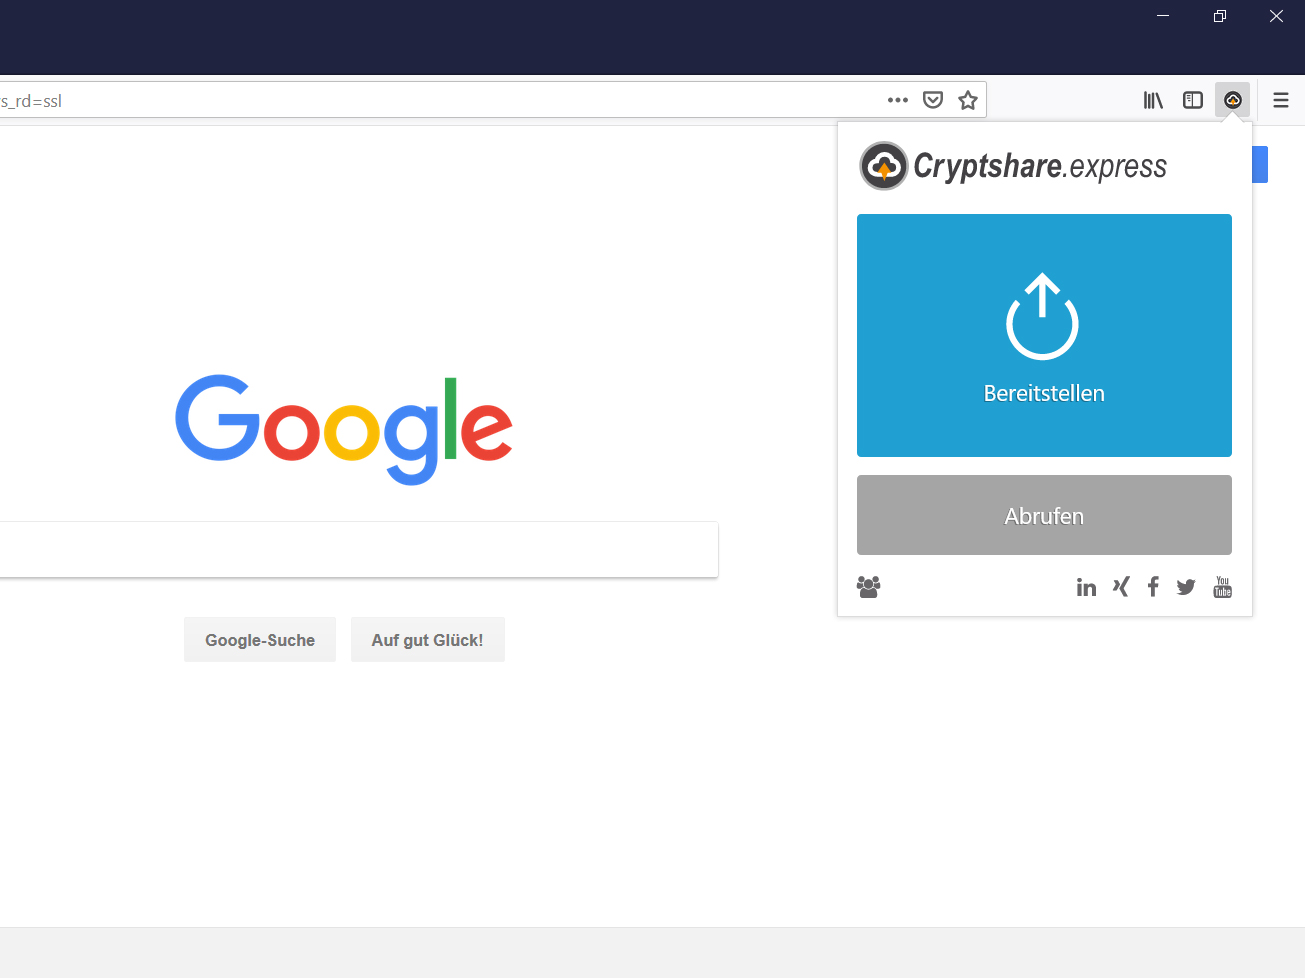 Cryptshare.express